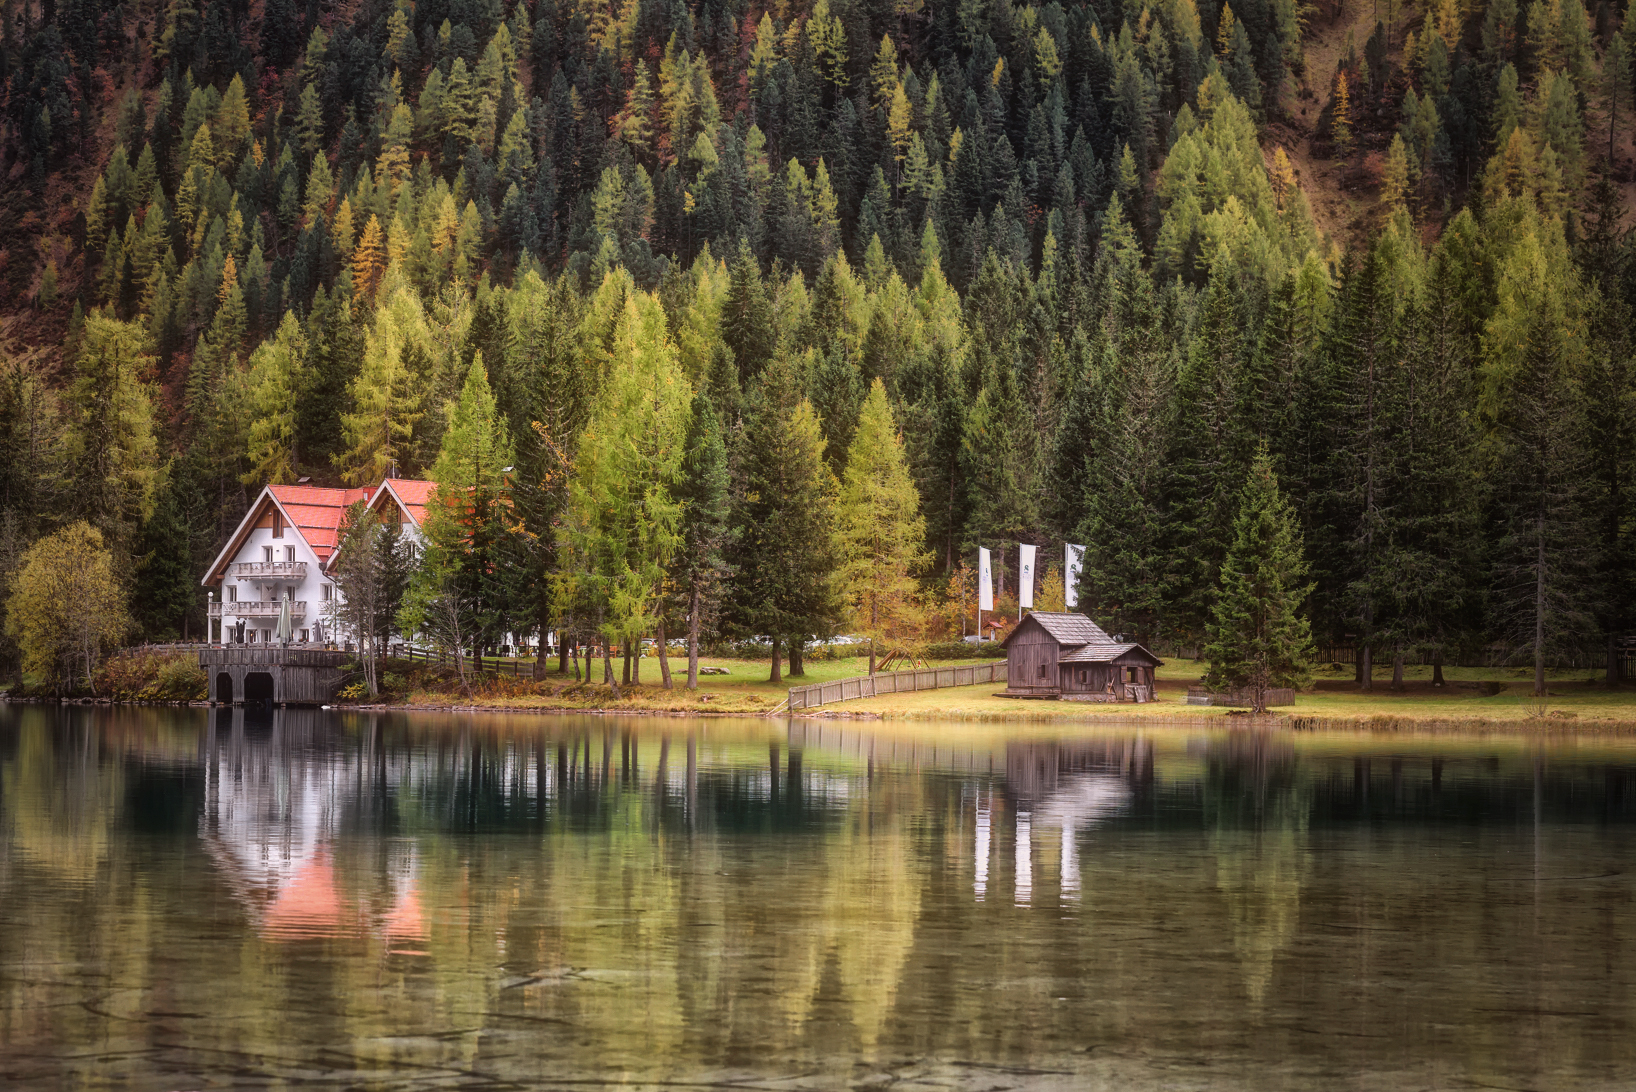 The house on the lake (Anterselva)...